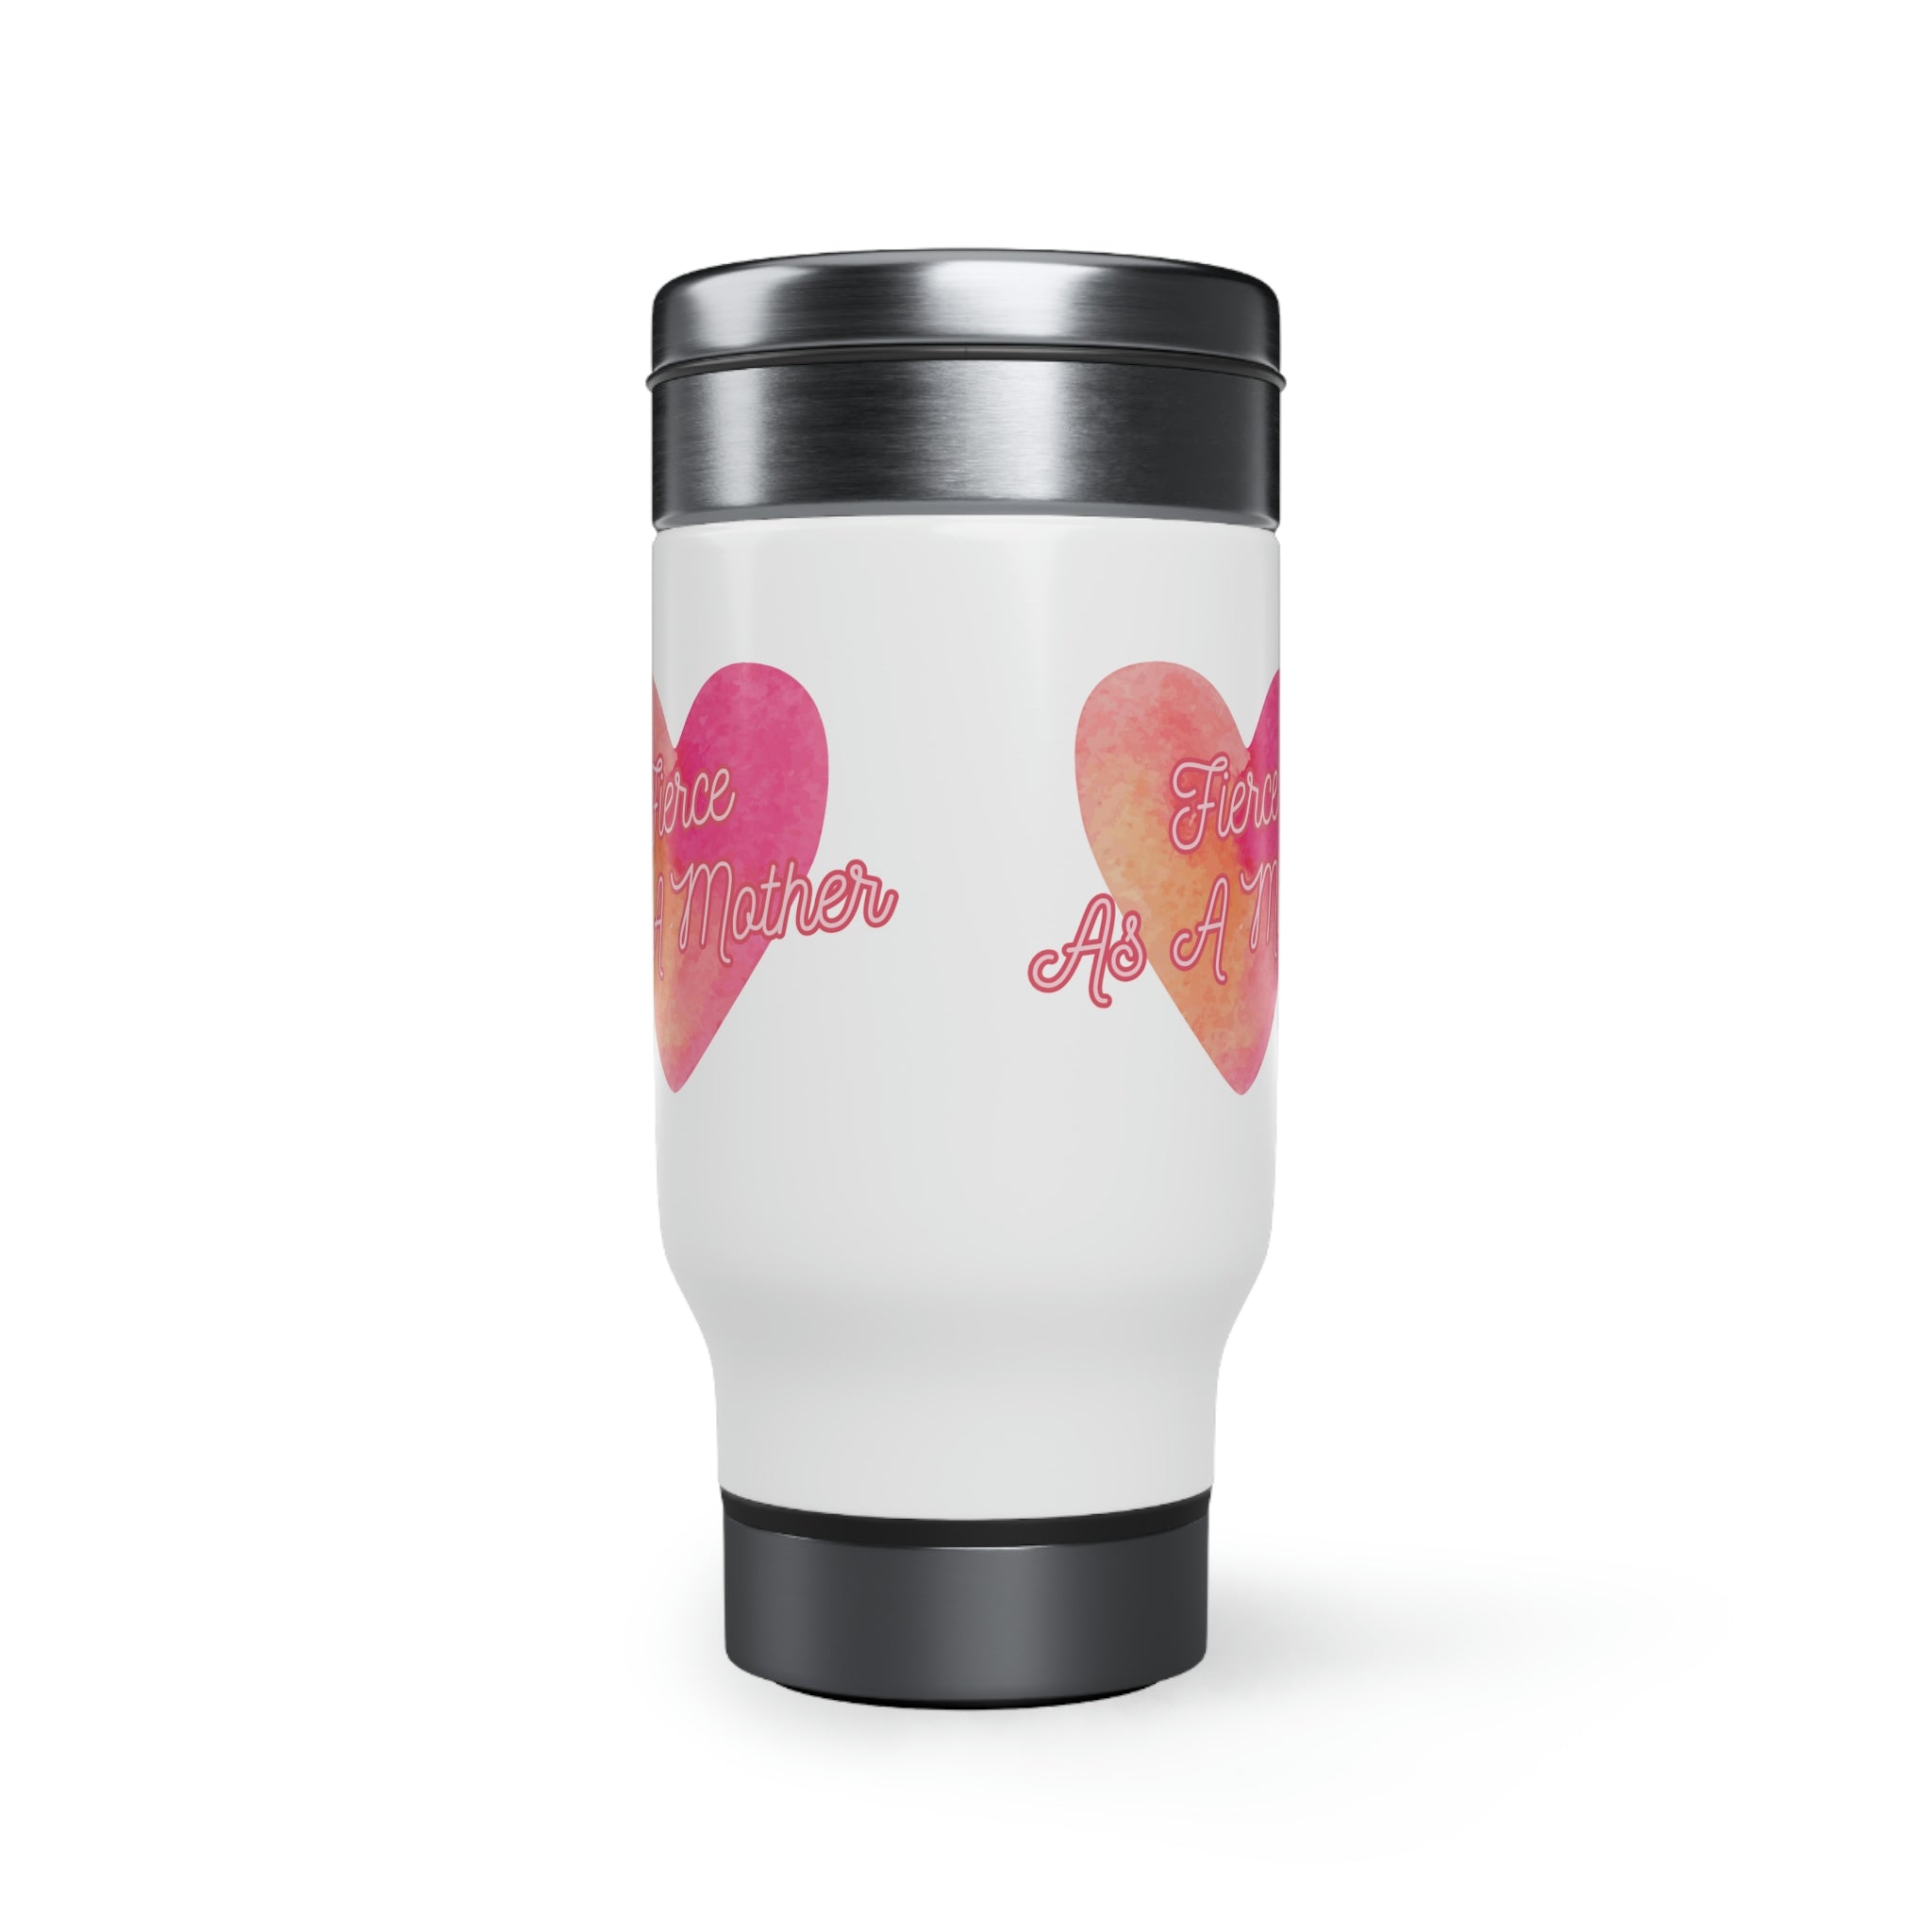 "Fierce As A Mother" Heart 2 Stainless Steel Travel Mug with Handle, 14oz